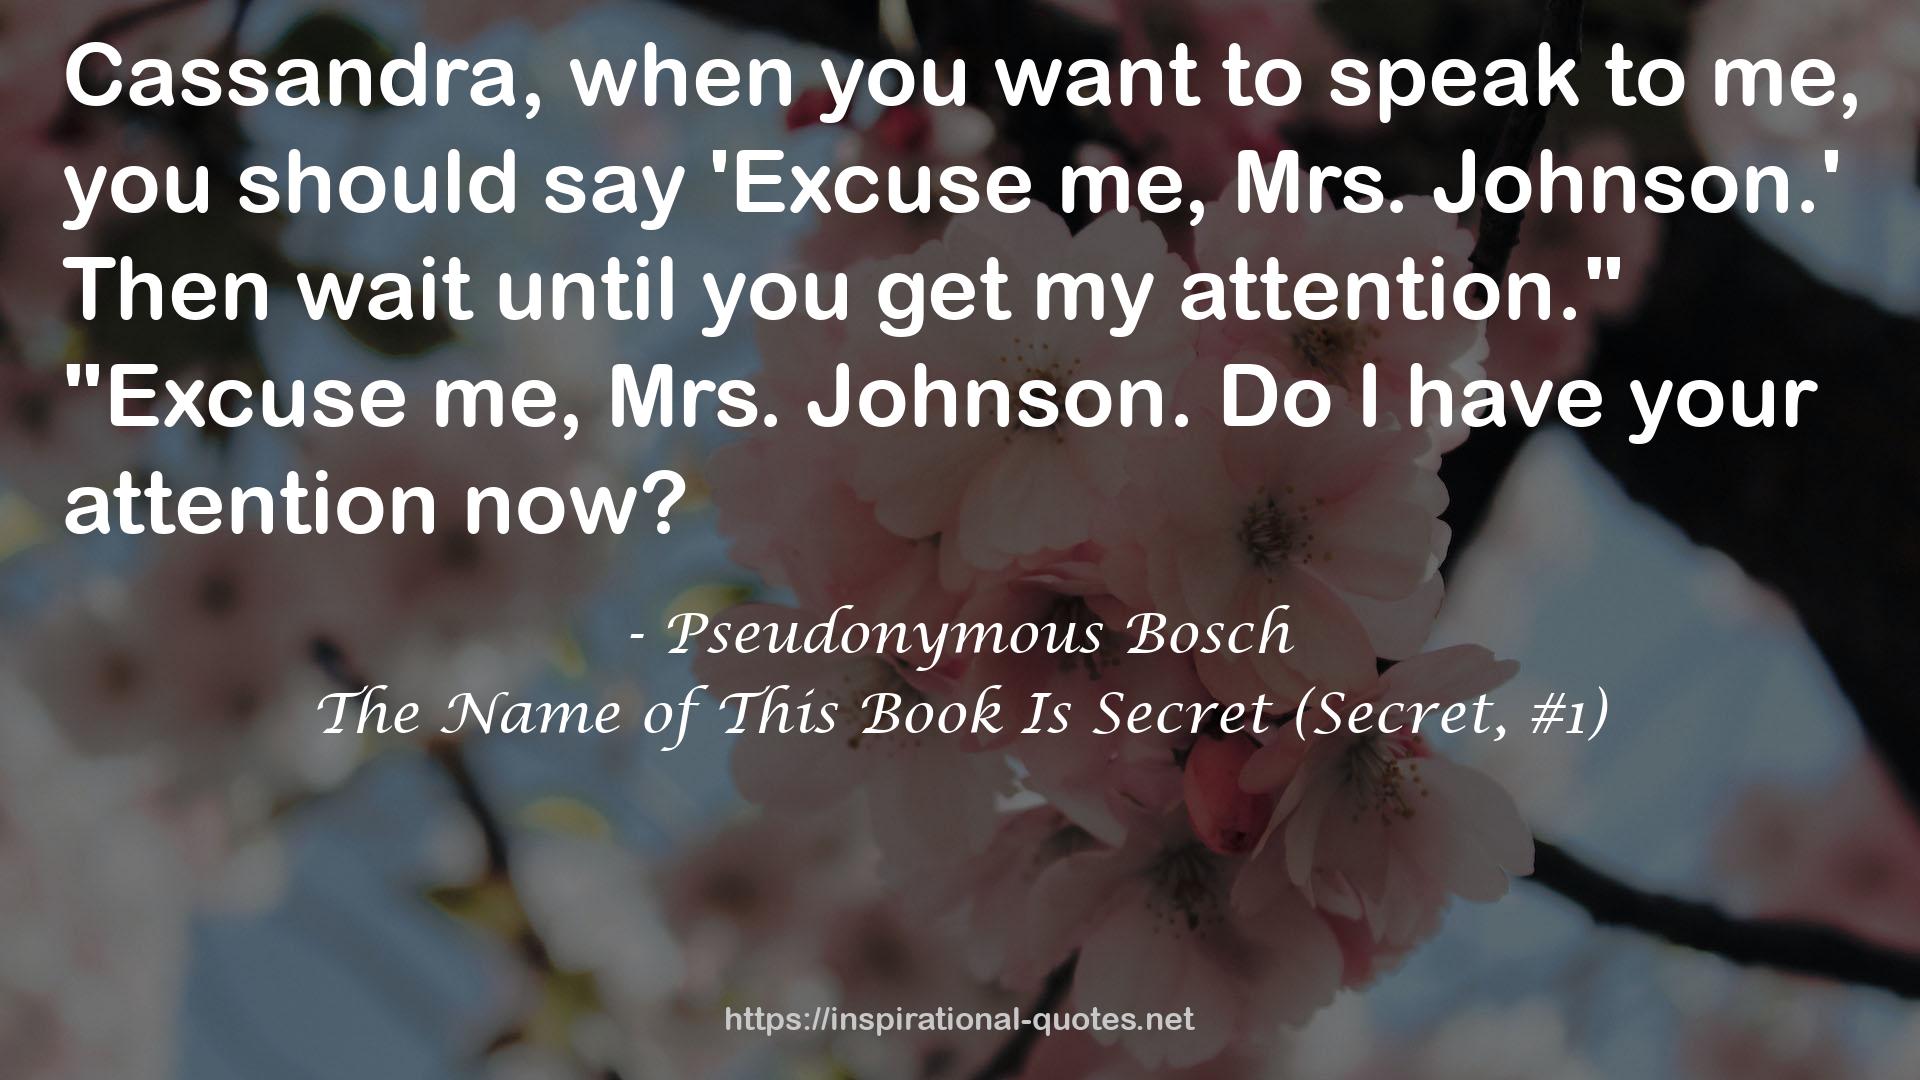 The Name of This Book Is Secret (Secret, #1) QUOTES